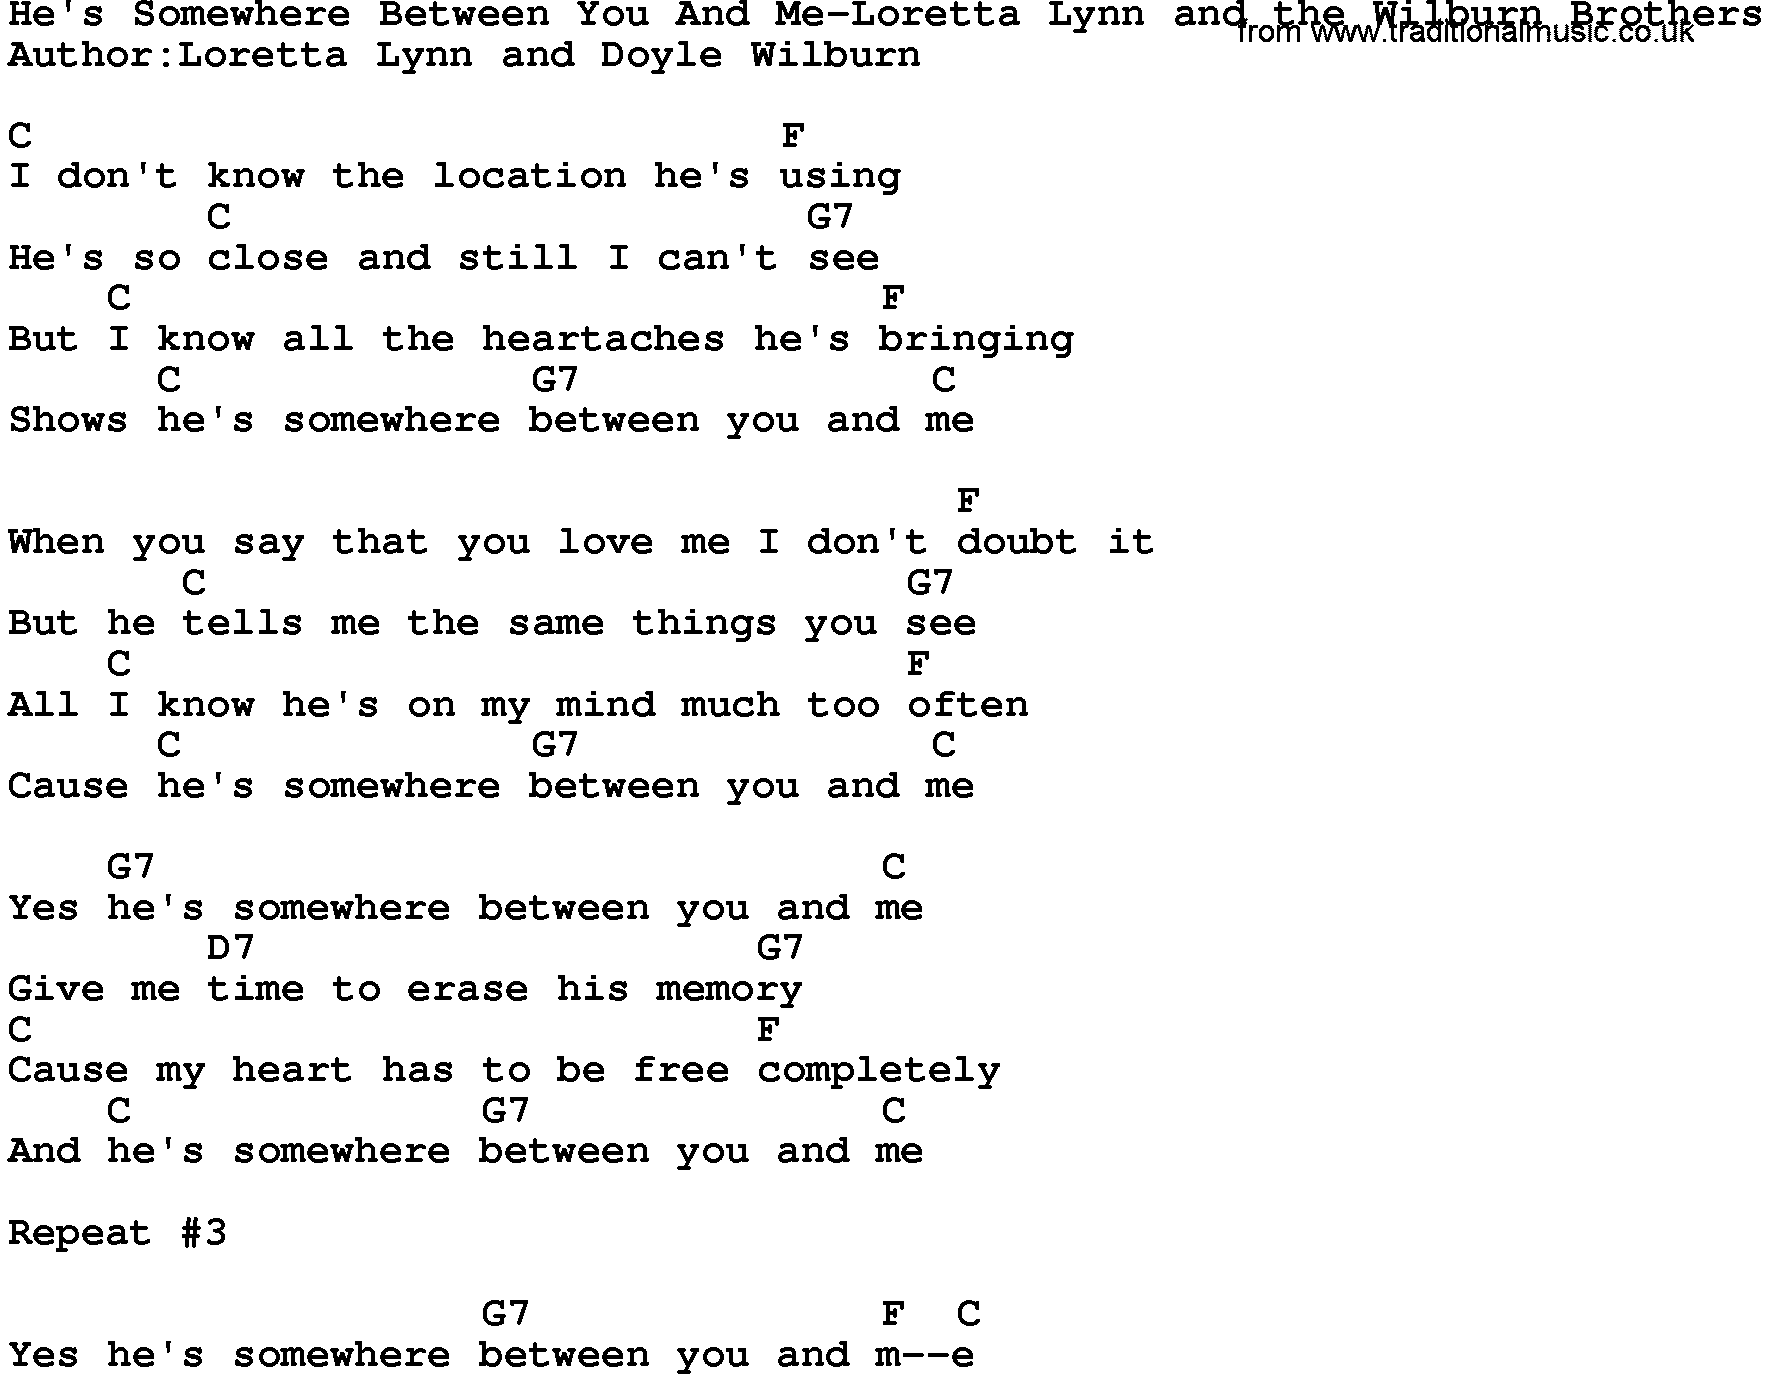 Country music song: He's Somewhere Between You And Me-Loretta Lynn And The Wilburn Brothers lyrics and chords